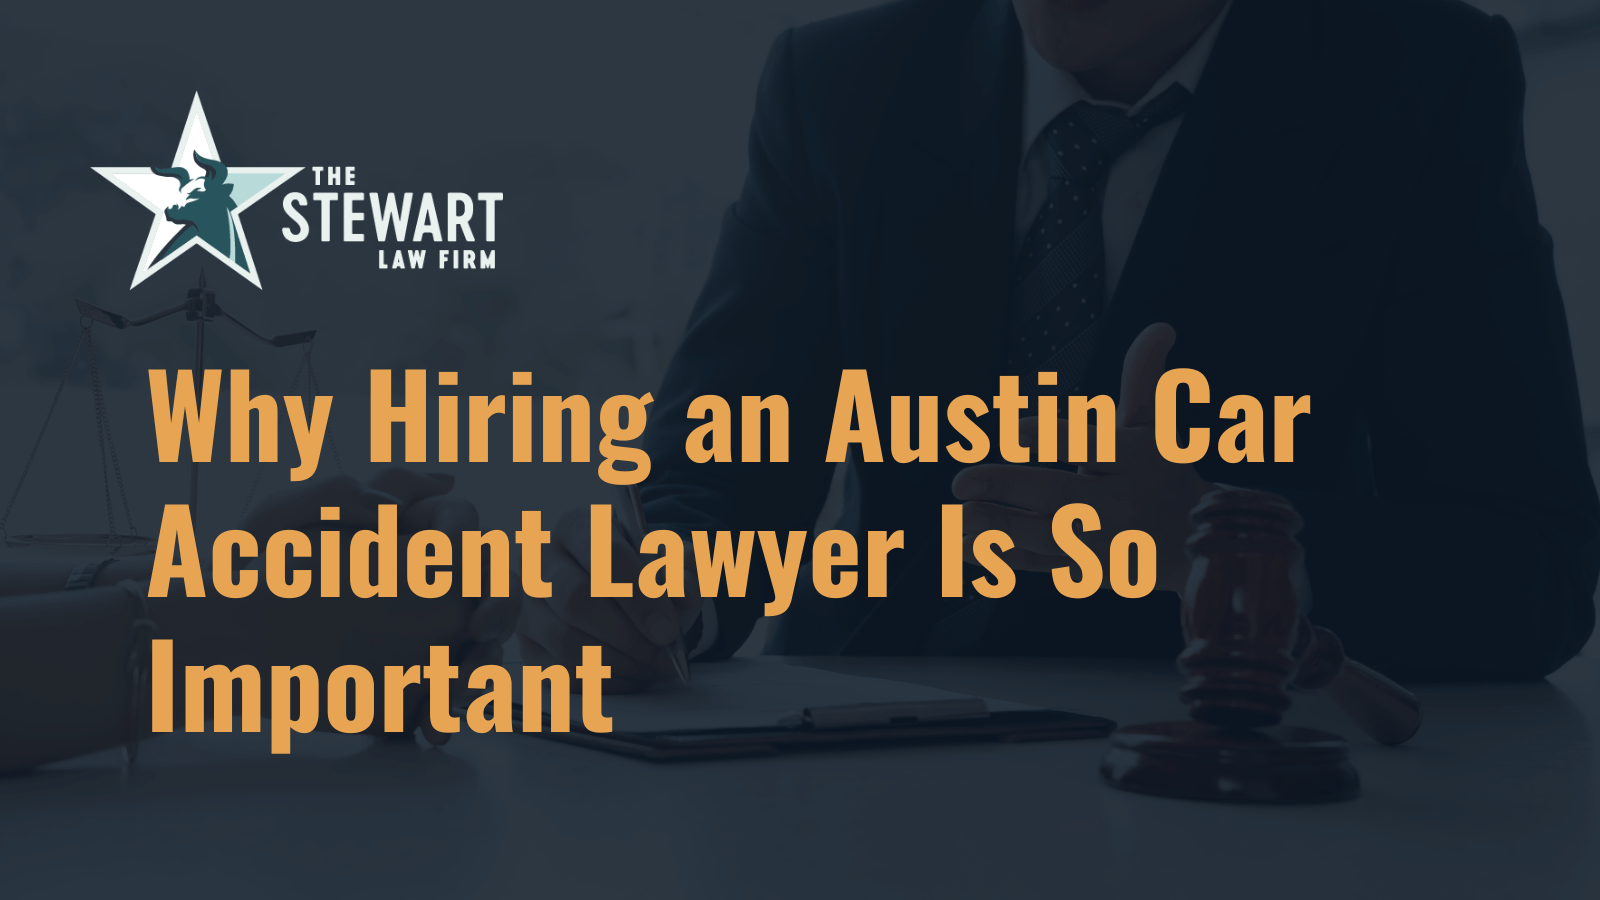 Why Hiring an Austin Car Accident Lawyer Is So Important - the stephen stewart law firm - austin texas personal injury lawyer